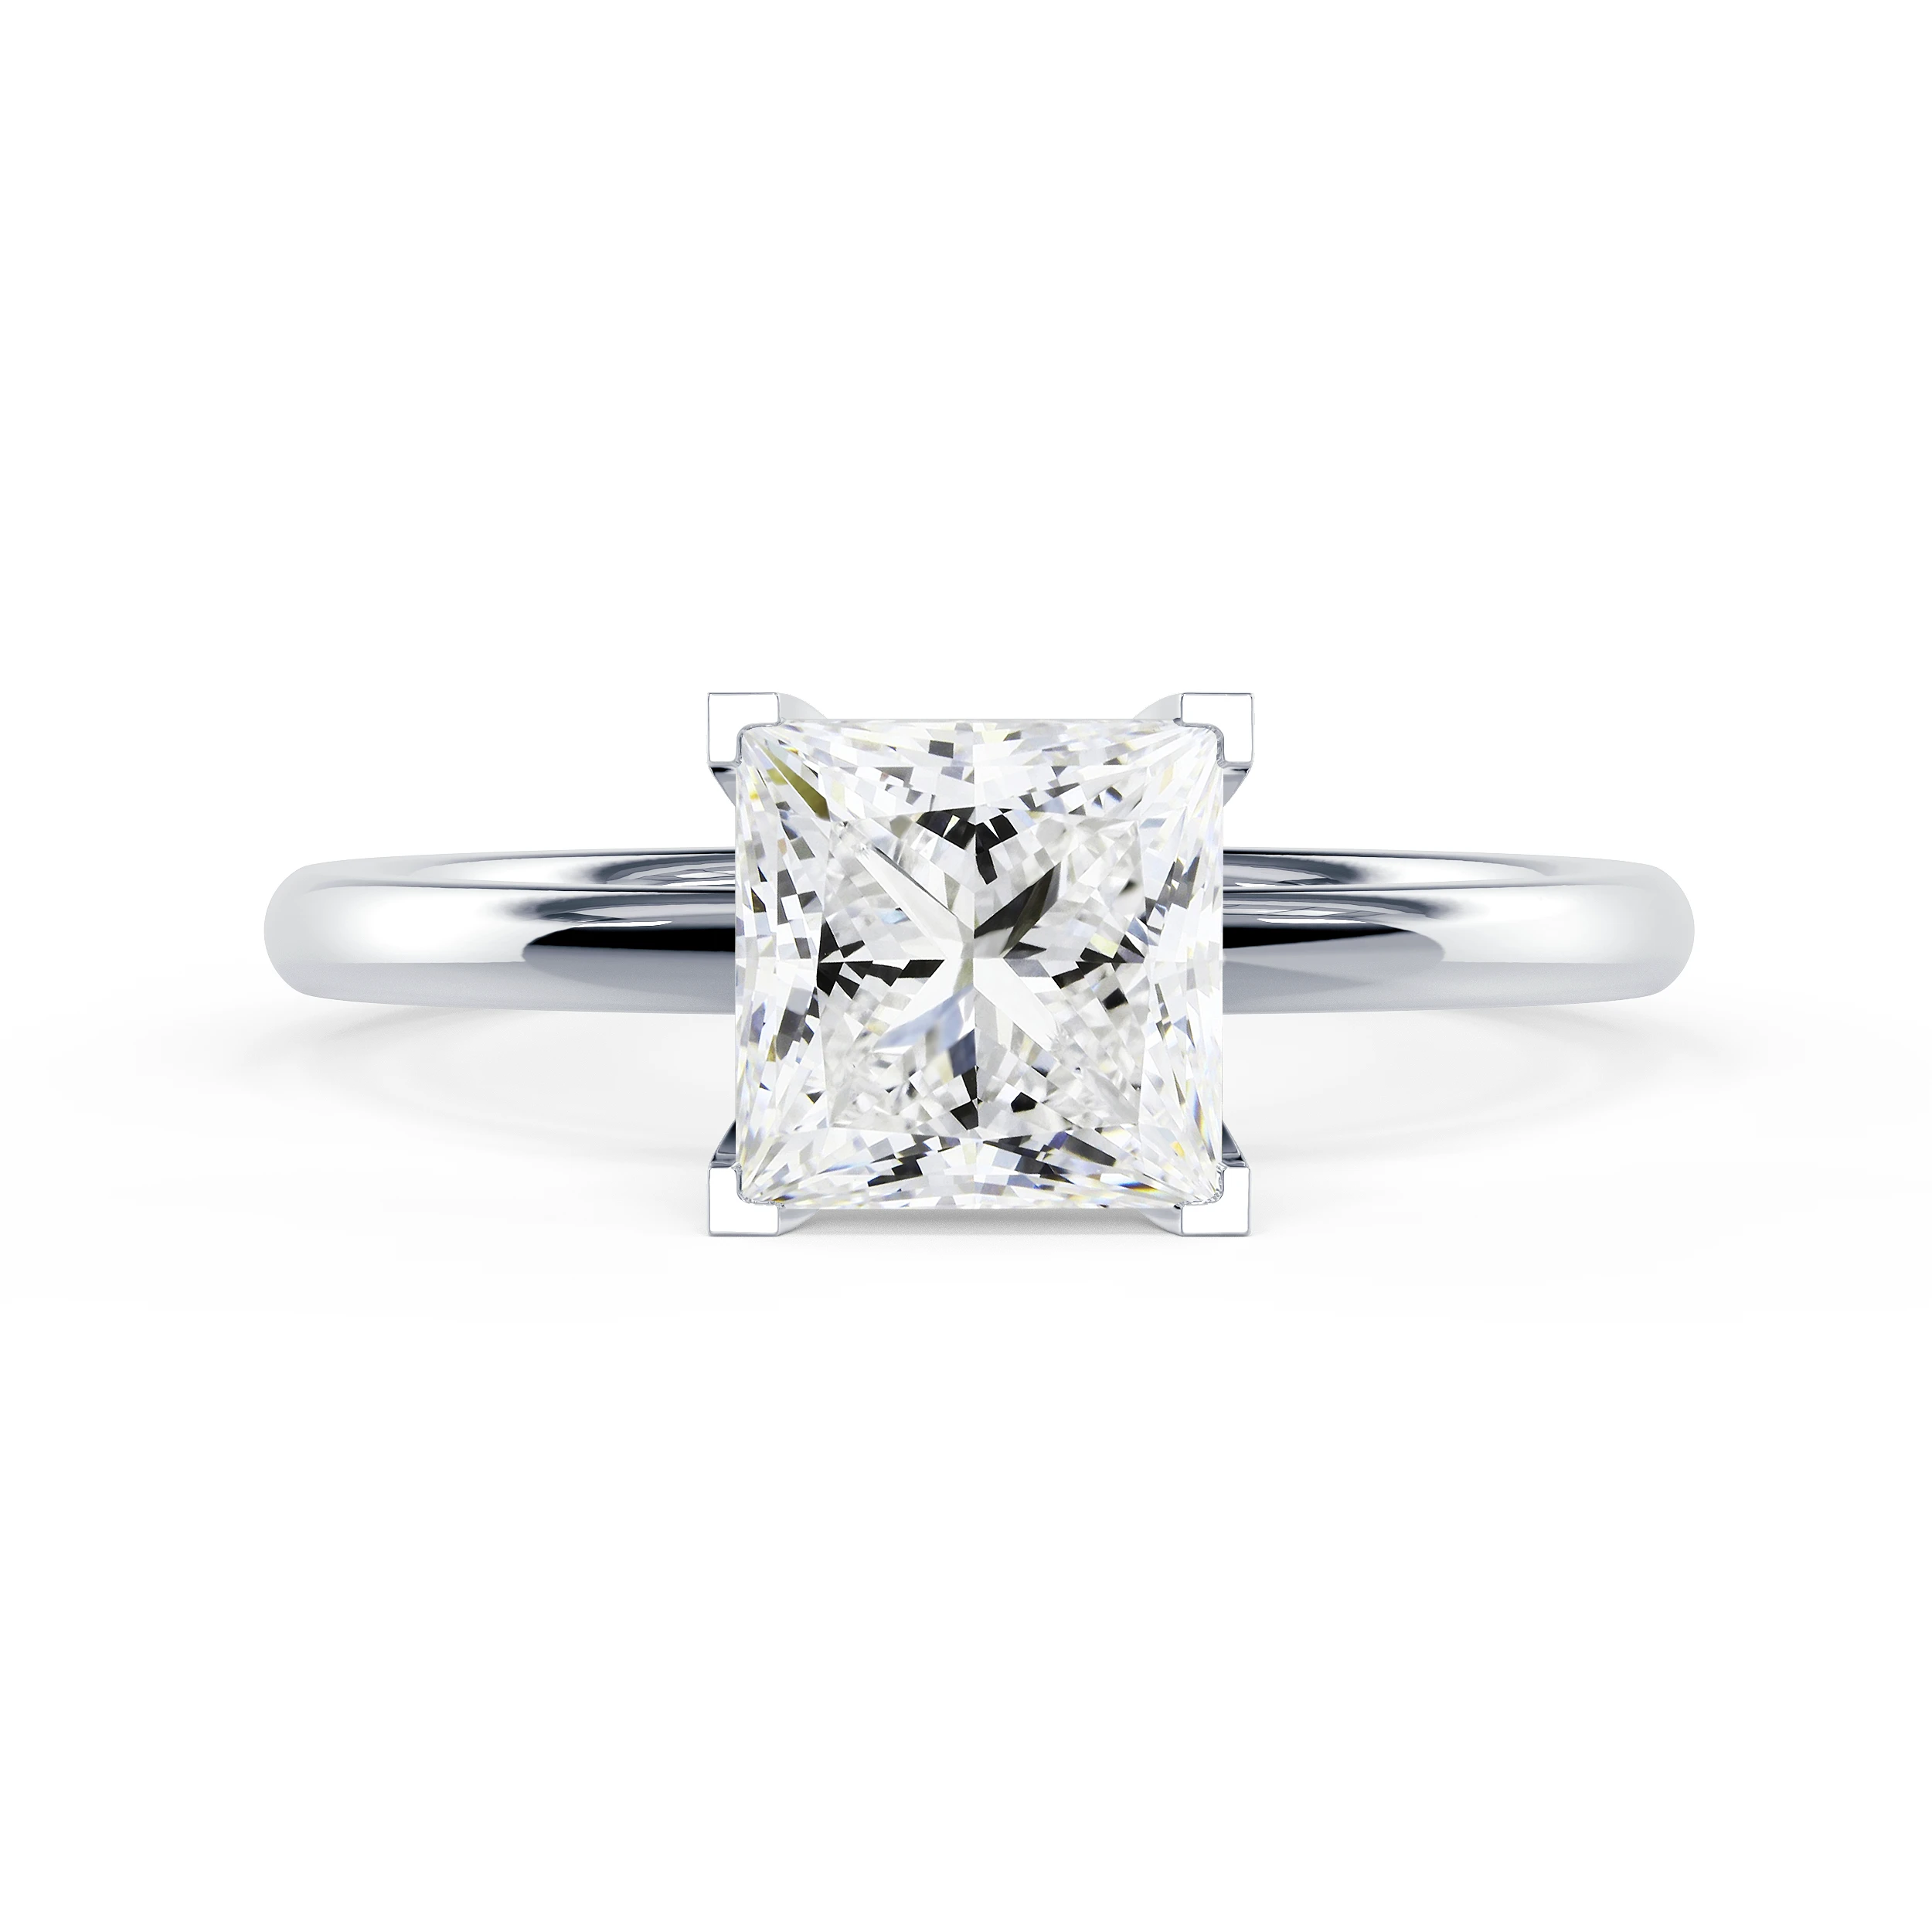 Hand Selected Lab Grown Diamonds Princess Petite Four Prong Solitaire Diamond Engagement Ring in White Gold (Main View)